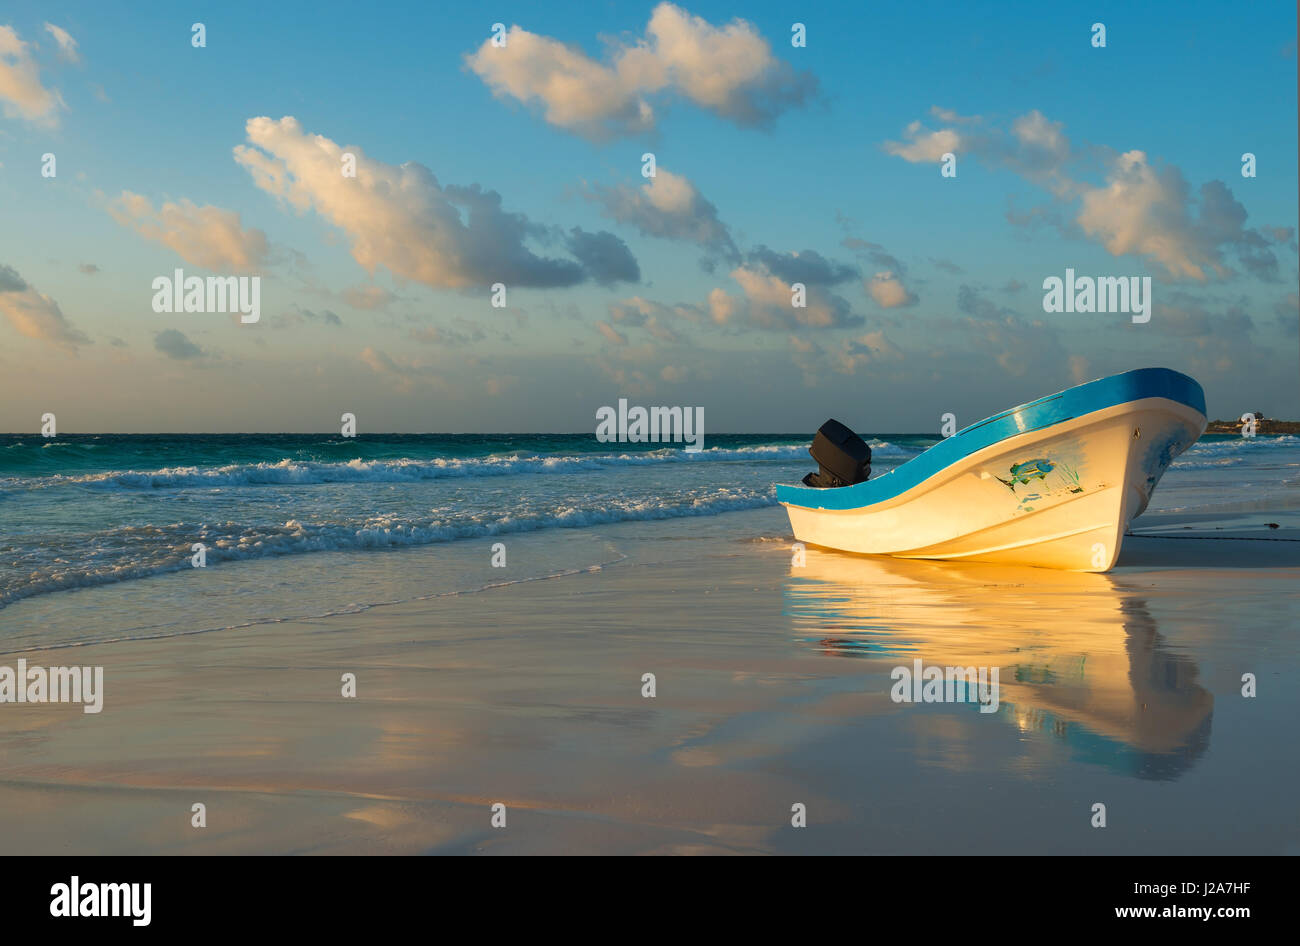 Typical fishing boat on the beach of Tulum at sunset by the Caribbean Coast of Mexico. Stock Photo